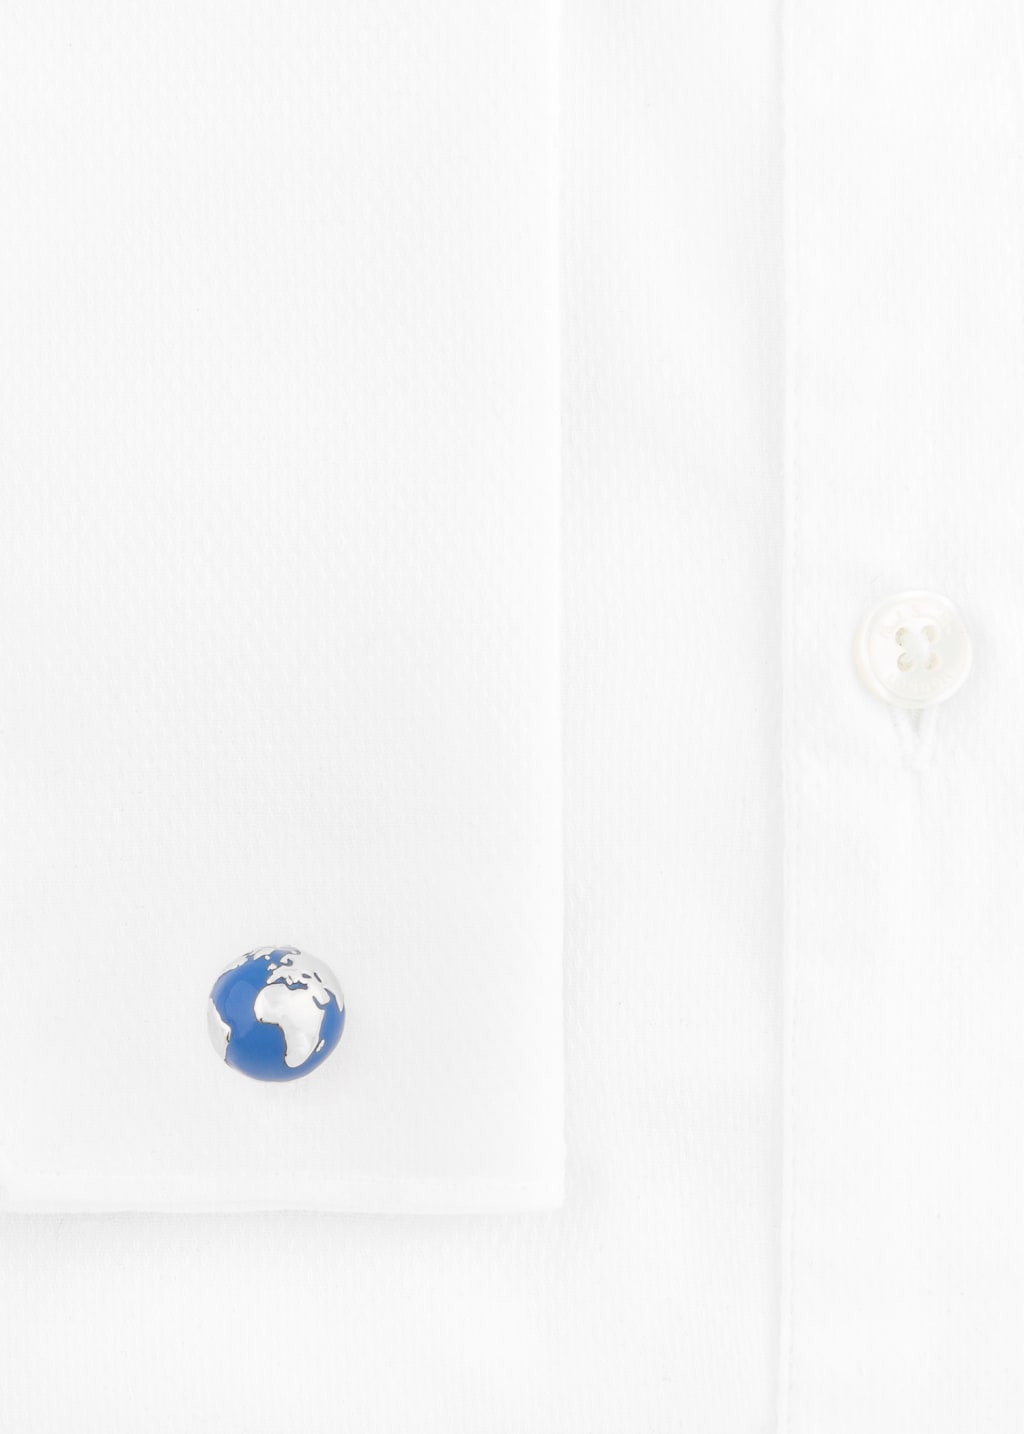 Detail View - Navy and Silver Globe Cufflinks Paul Smith